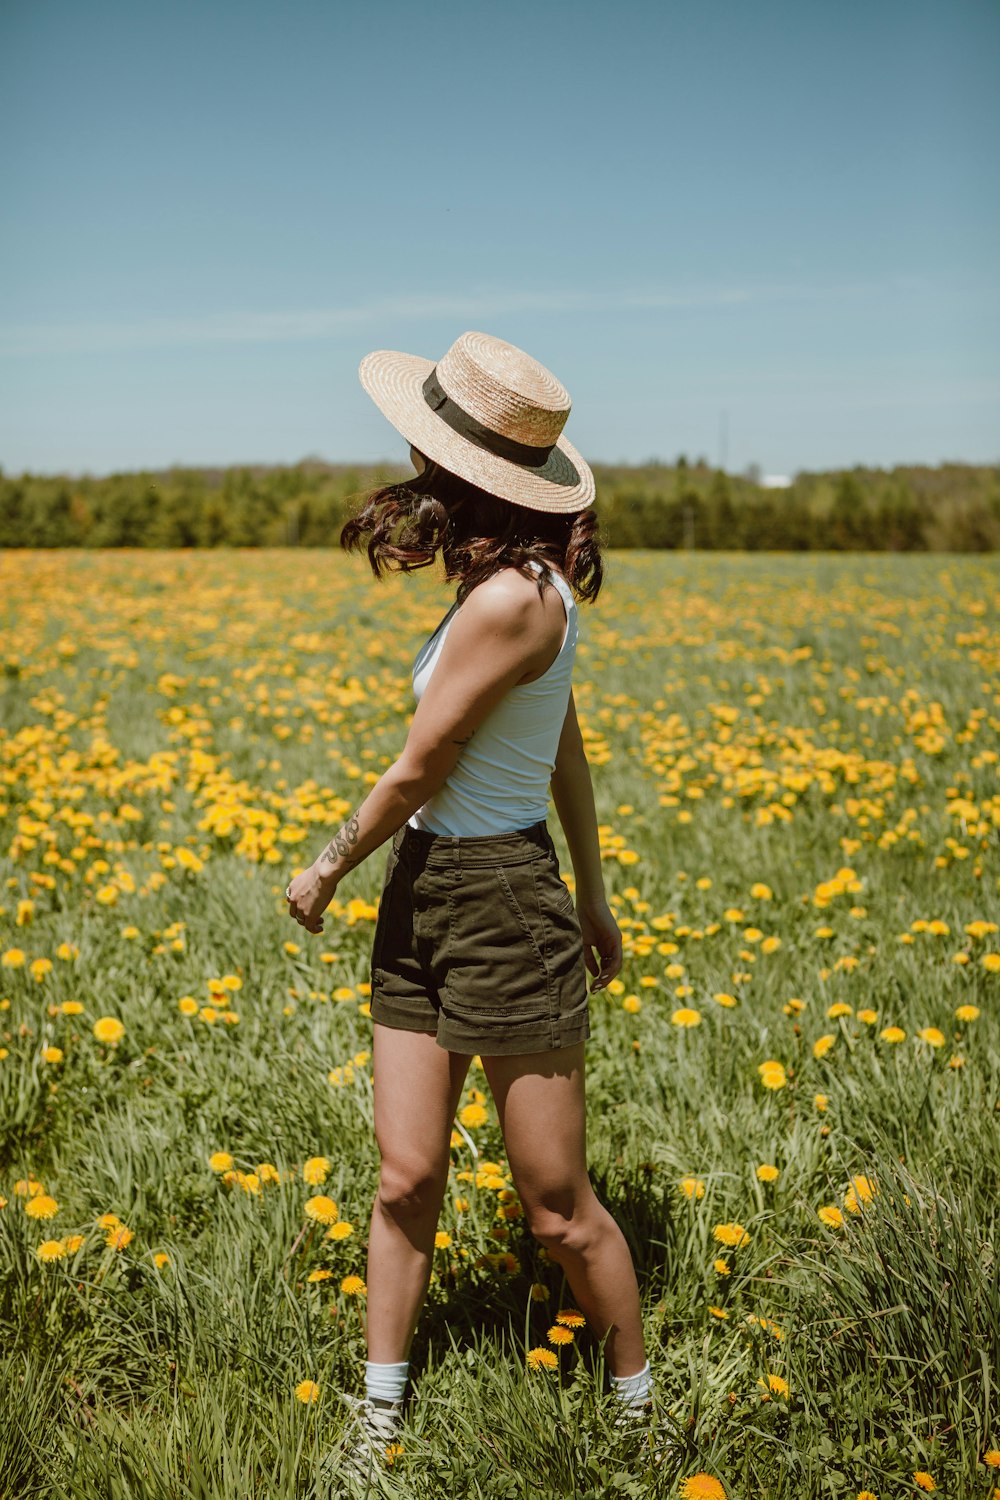 Woman in white tank top and black skirt standing on yellow flower field  during daytime photo – Free Style Image on Unsplash